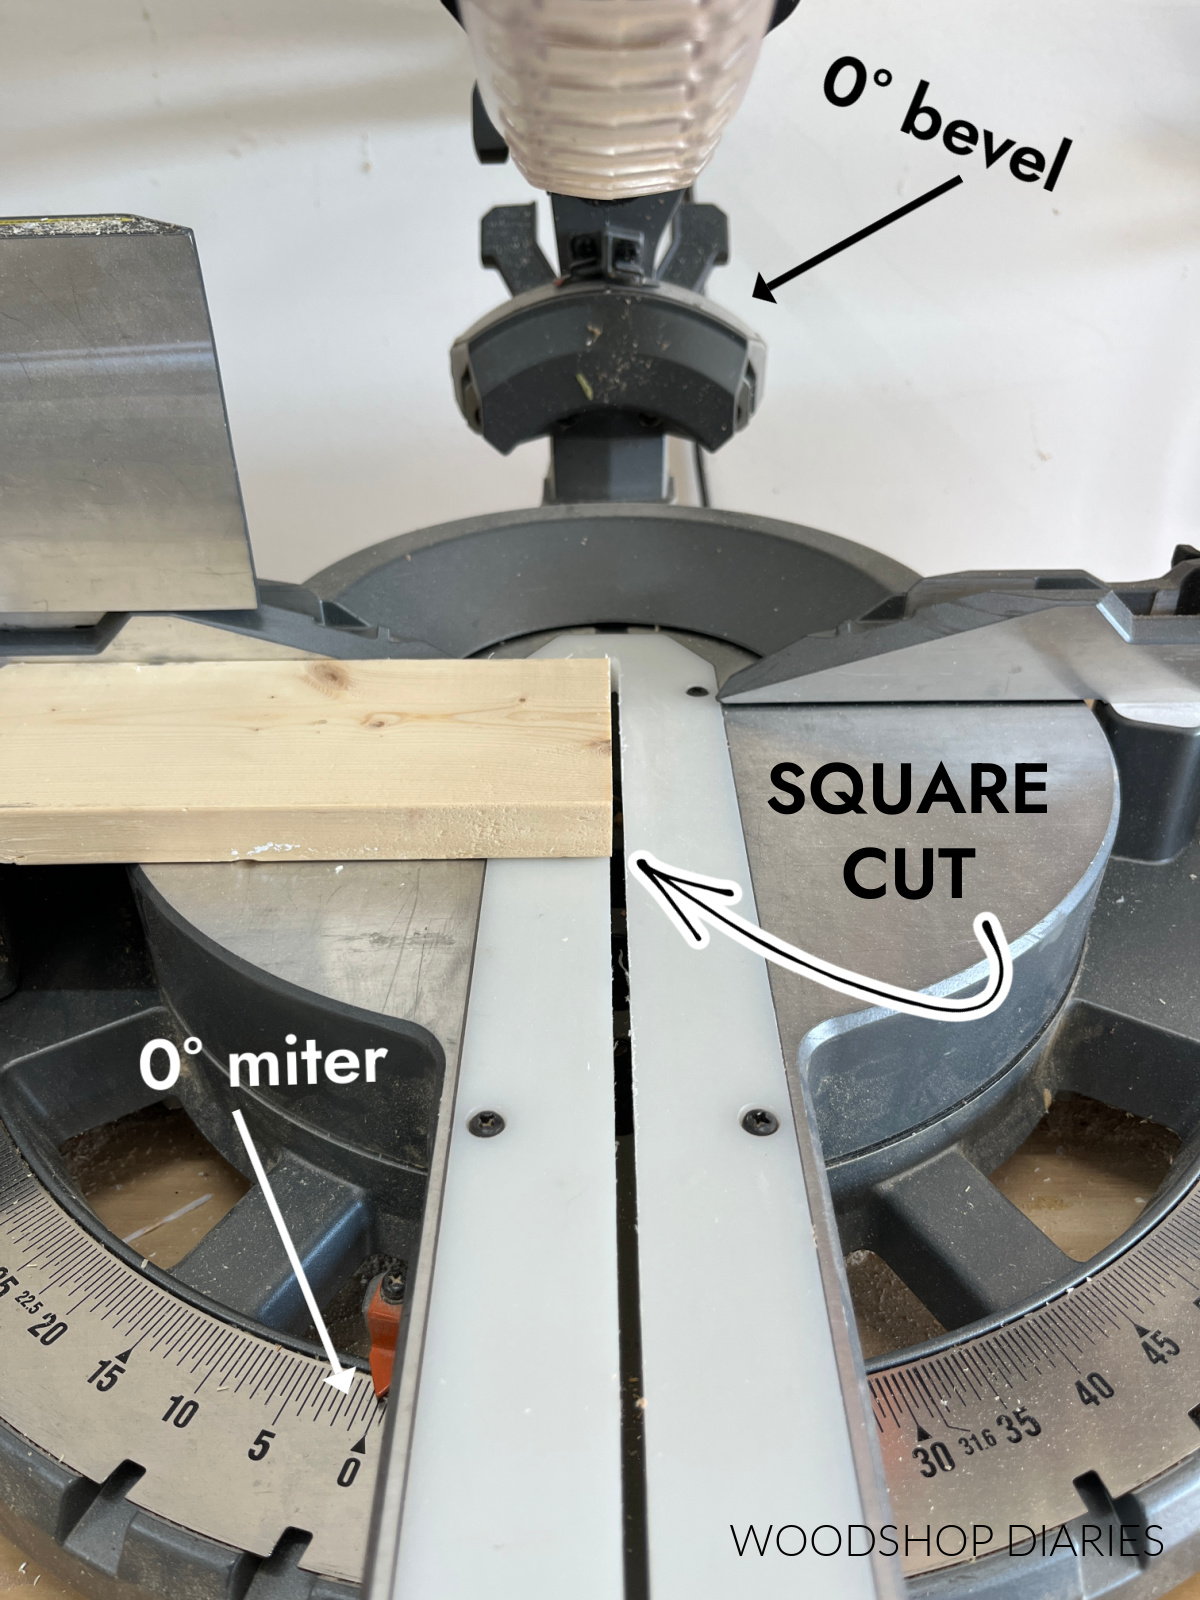 Arrows pointing to 0 degree bevel and miter on saw with square cut board on saw base